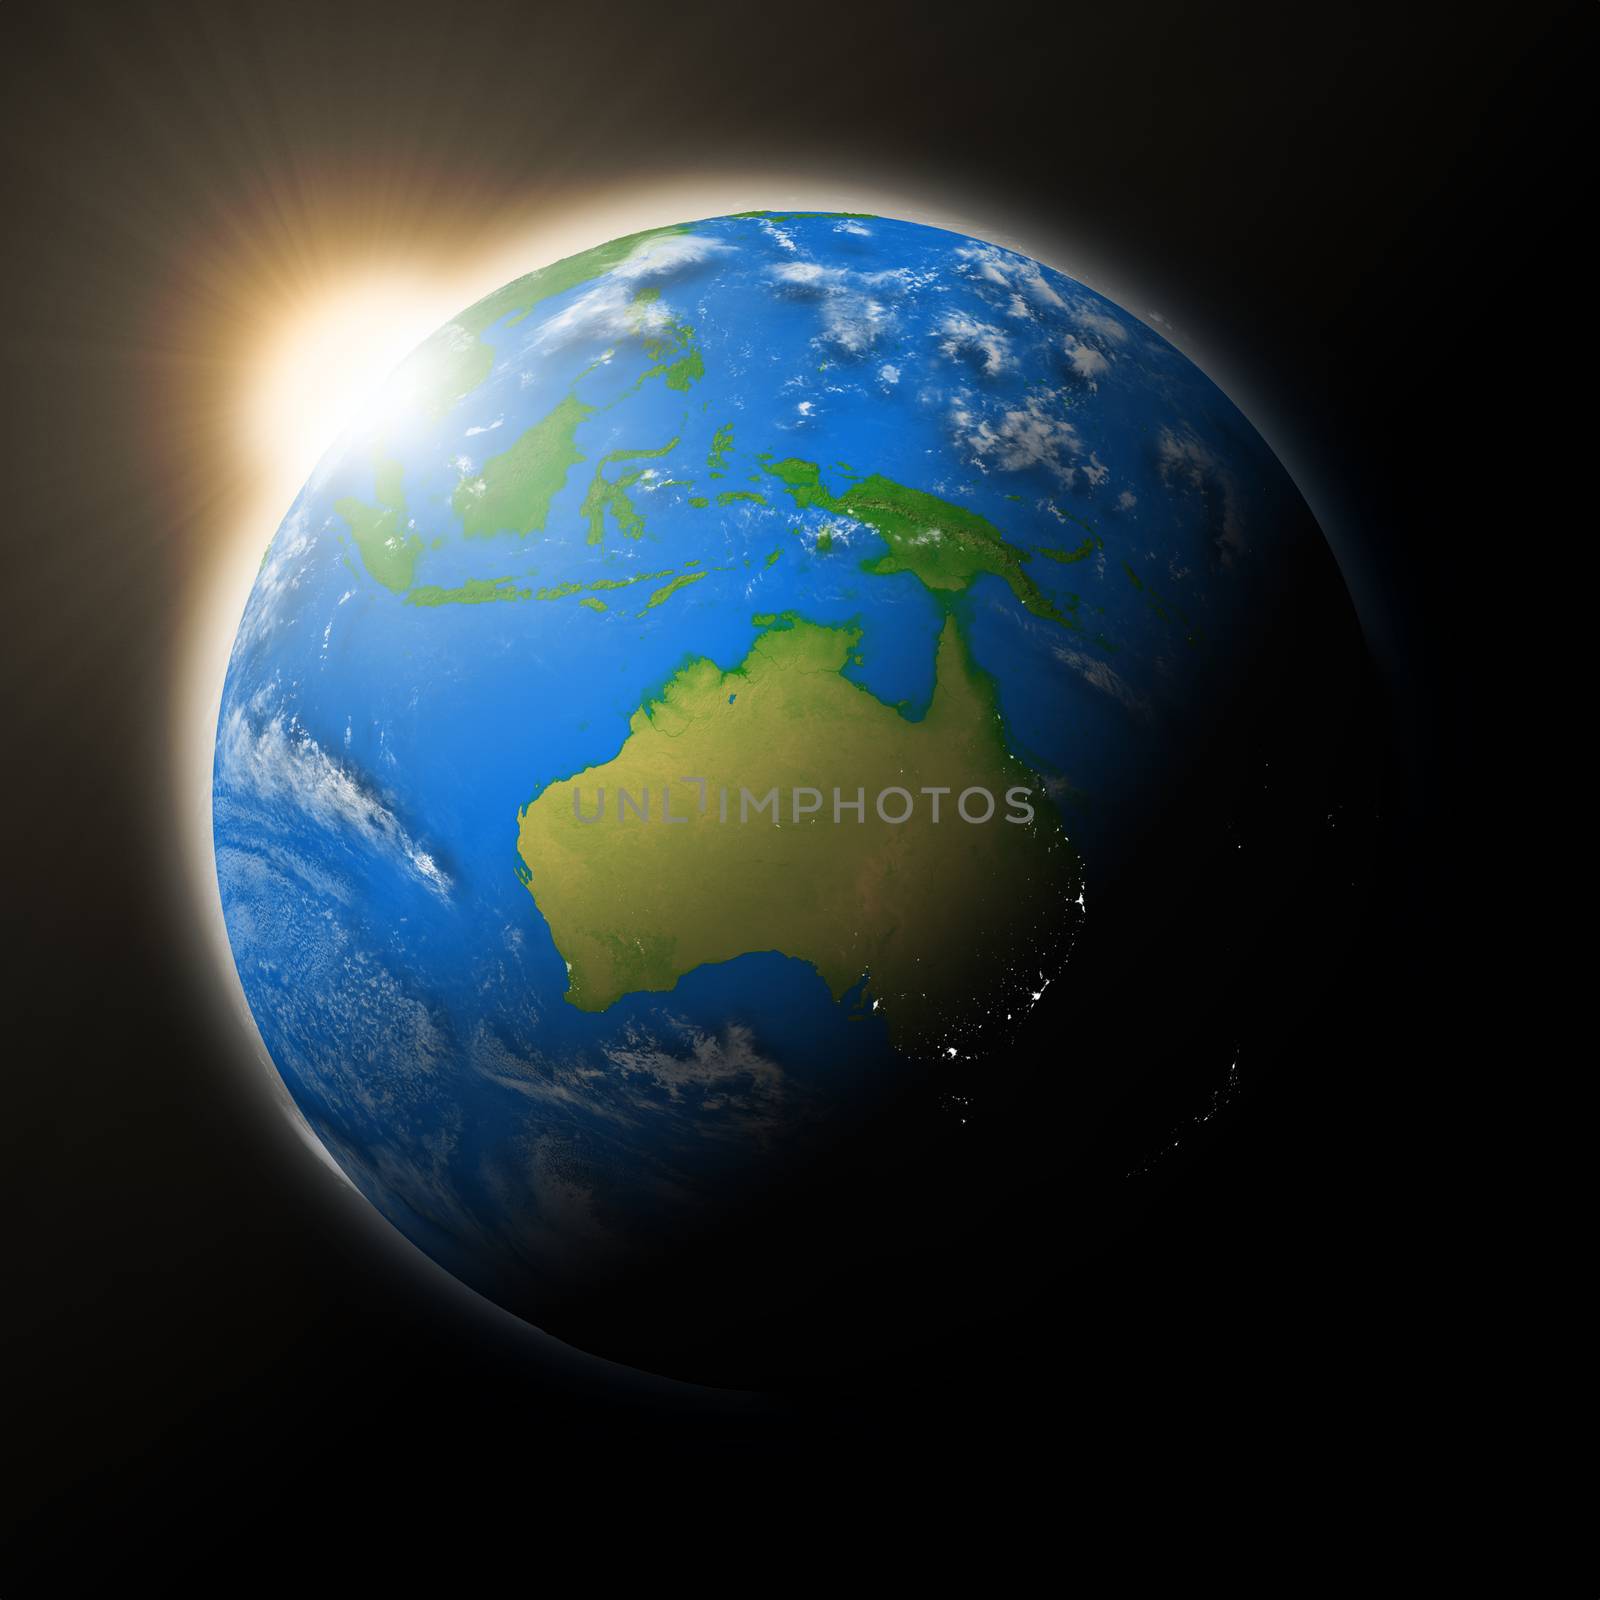 Sun over Australia on blue planet Earth isolated on black background. Highly detailed planet surface. Elements of this image furnished by NASA.